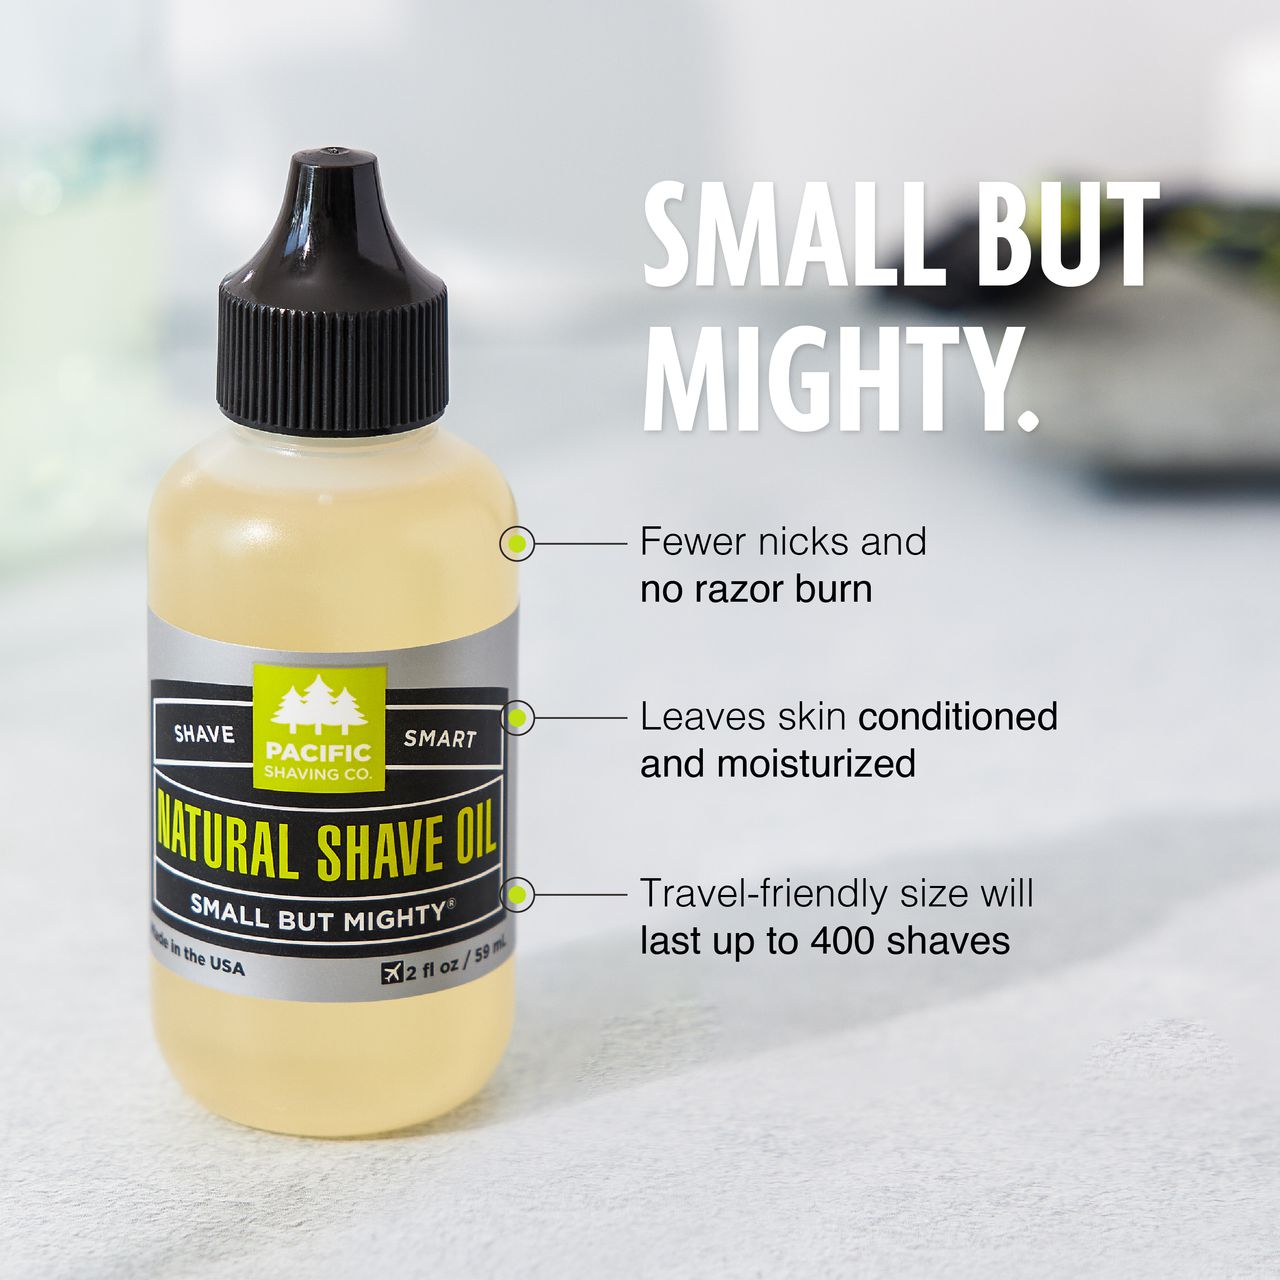 Natural Shaving Oil by Pacific Shaving Company. Made from essential oils, this tiny miracle works wonders for both men and women on even the most sensitive skin.